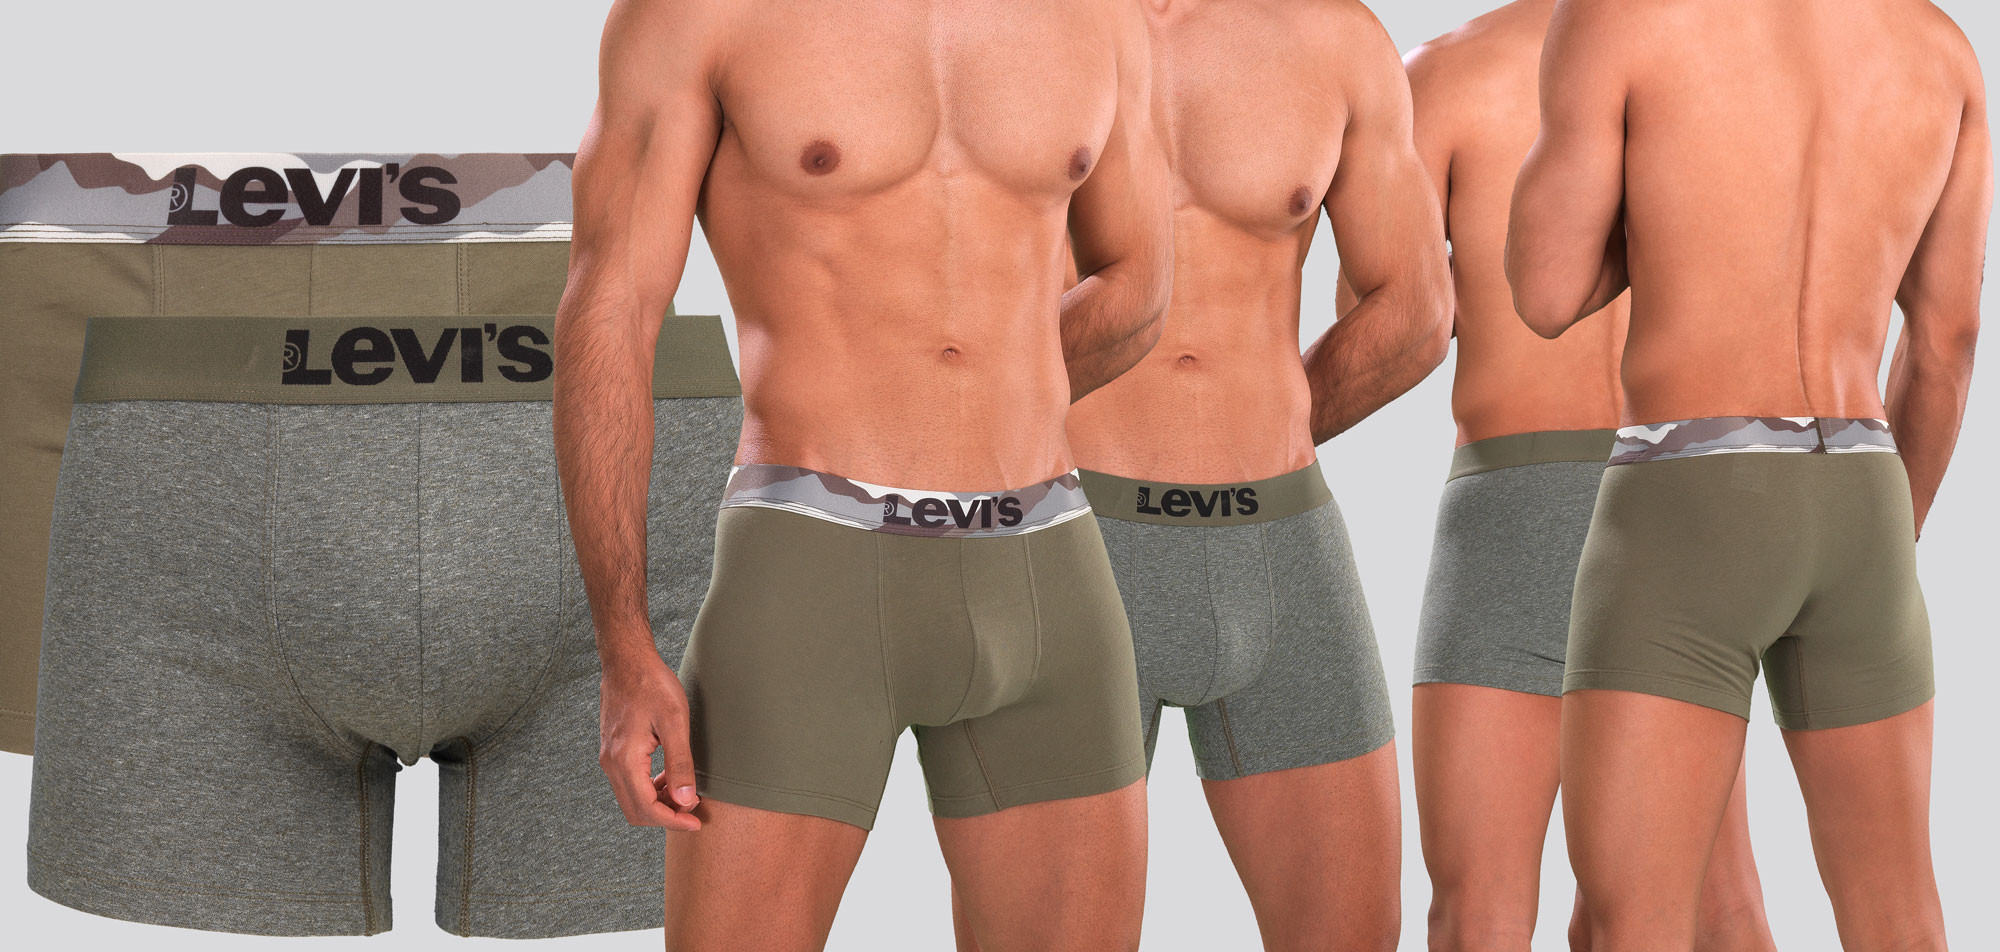 Levi_s Printed Waistband Boxer Brief 2-Pack 905,